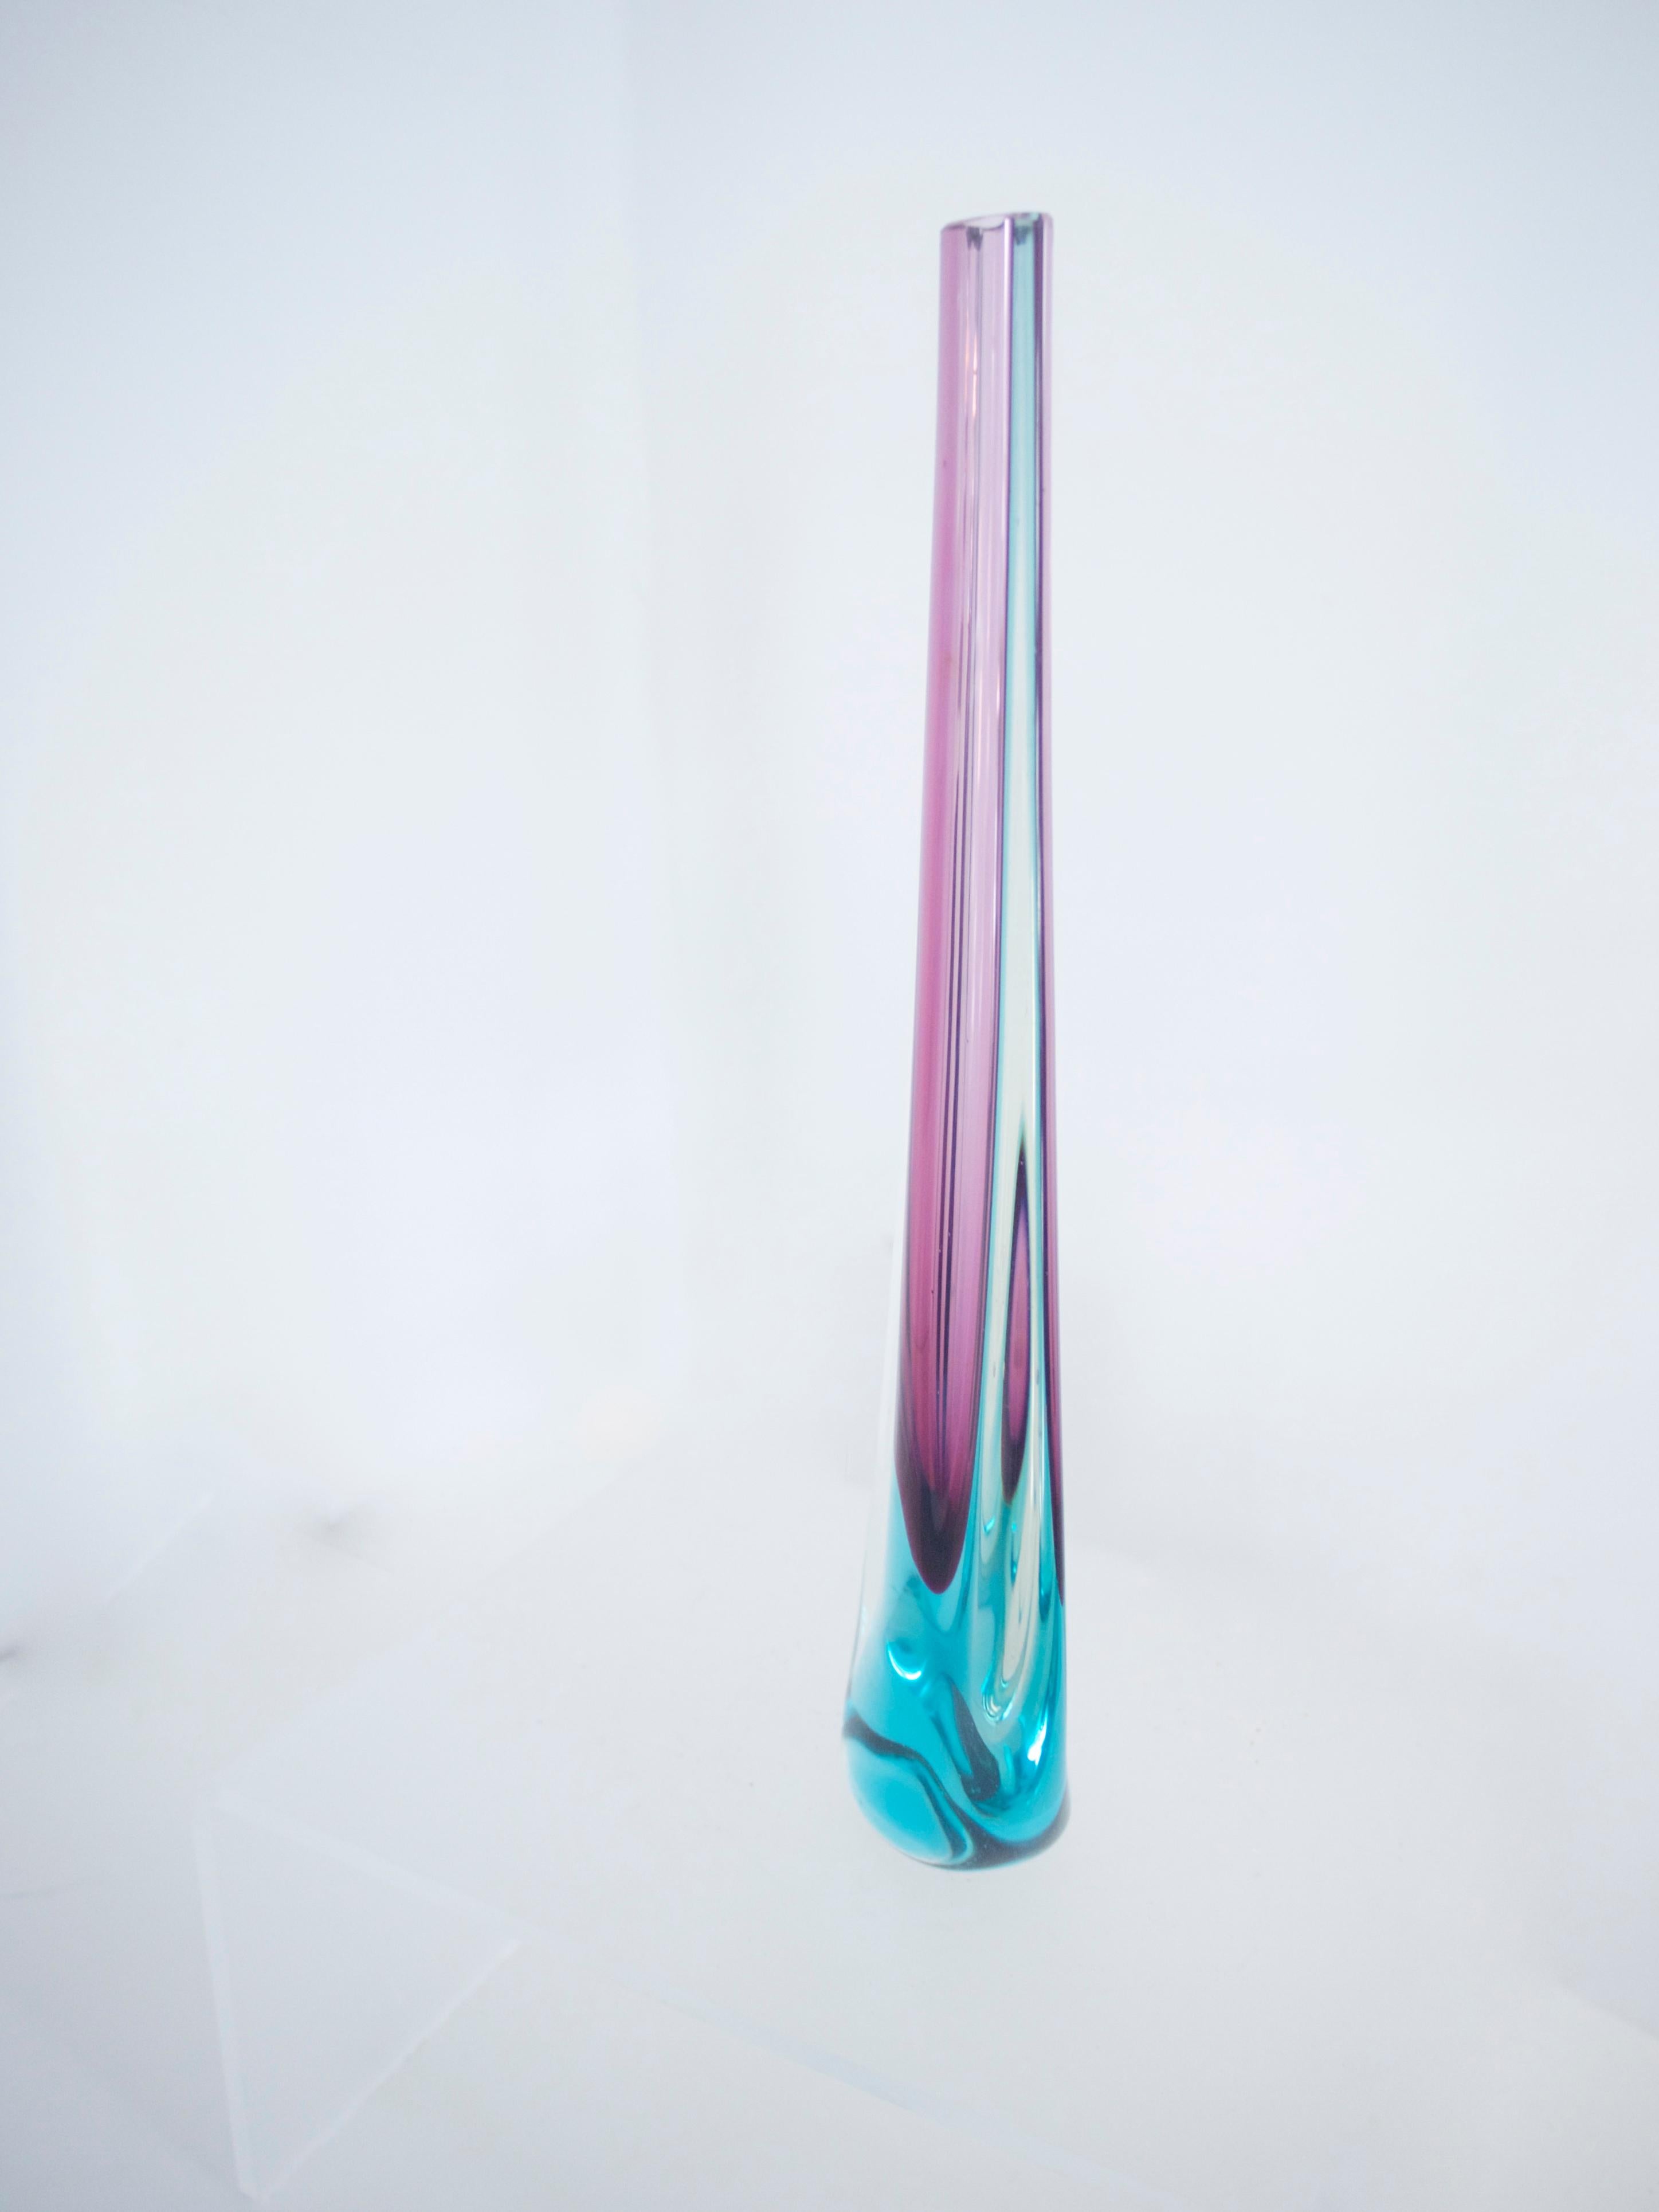 Art Glass Modernist Glass Vases Murano Teardrop by Ferro and 'Block' Vase by Nuutajarvi For Sale